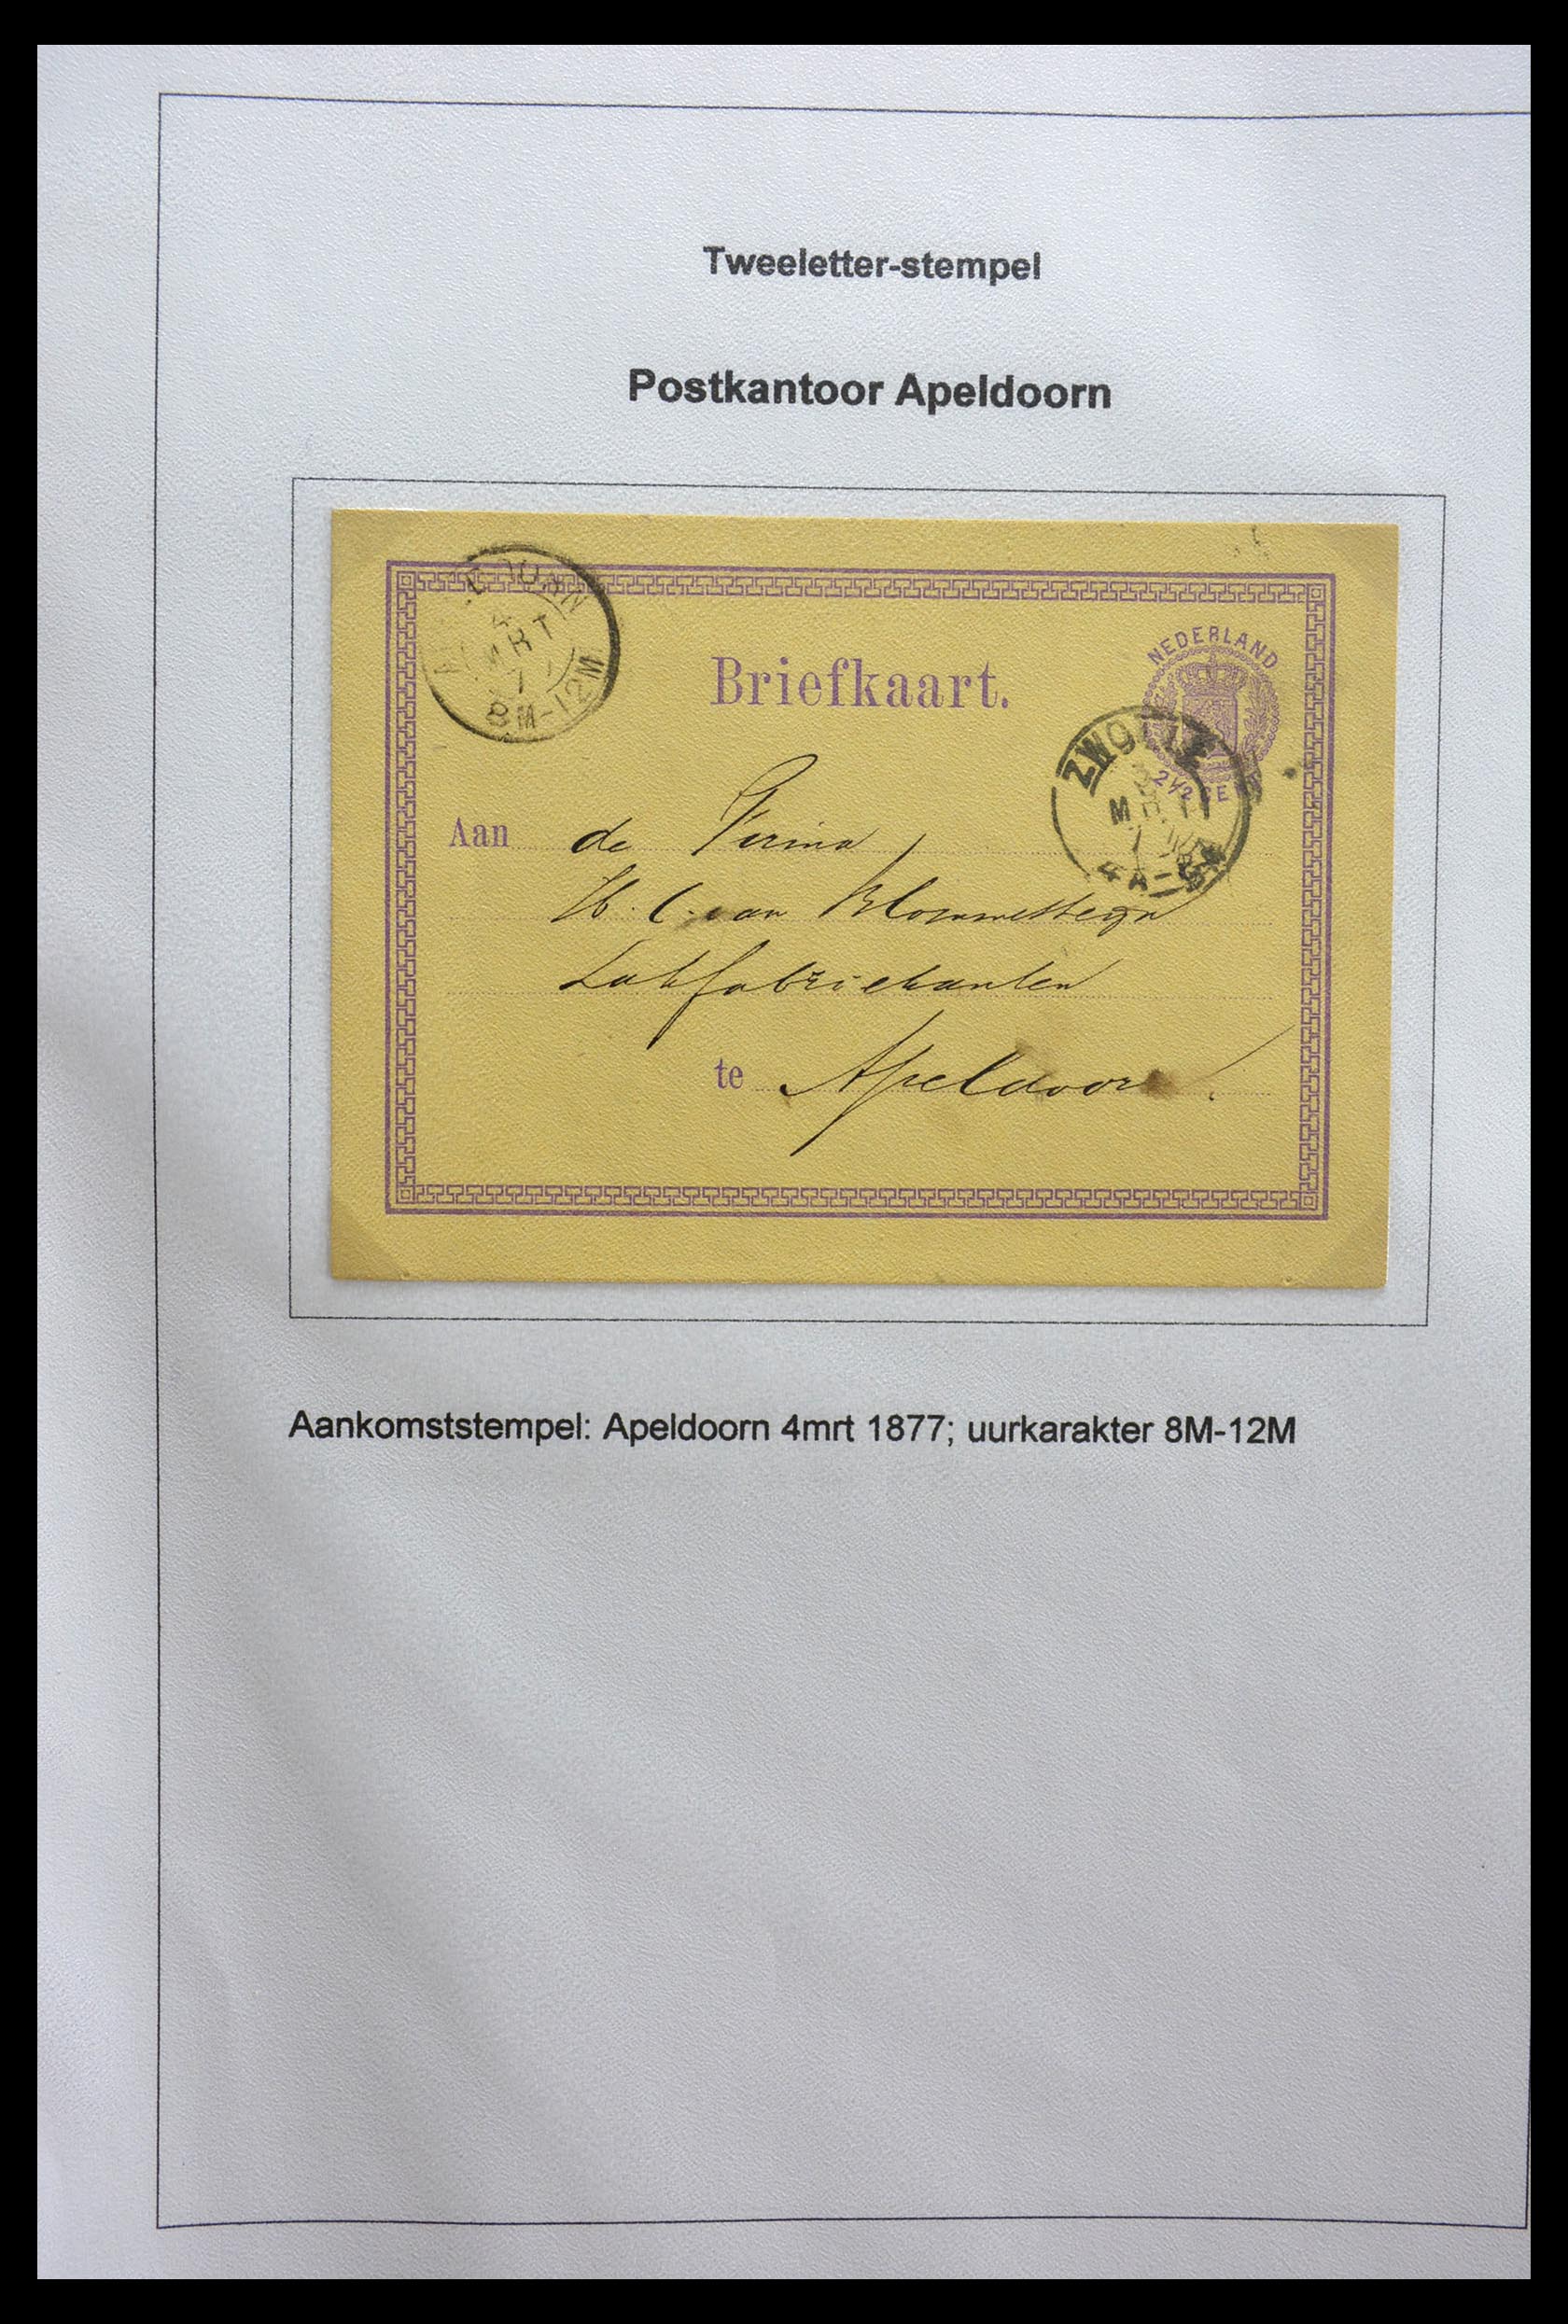 29365 008 - 29365 Netherlands 2-character cancels.